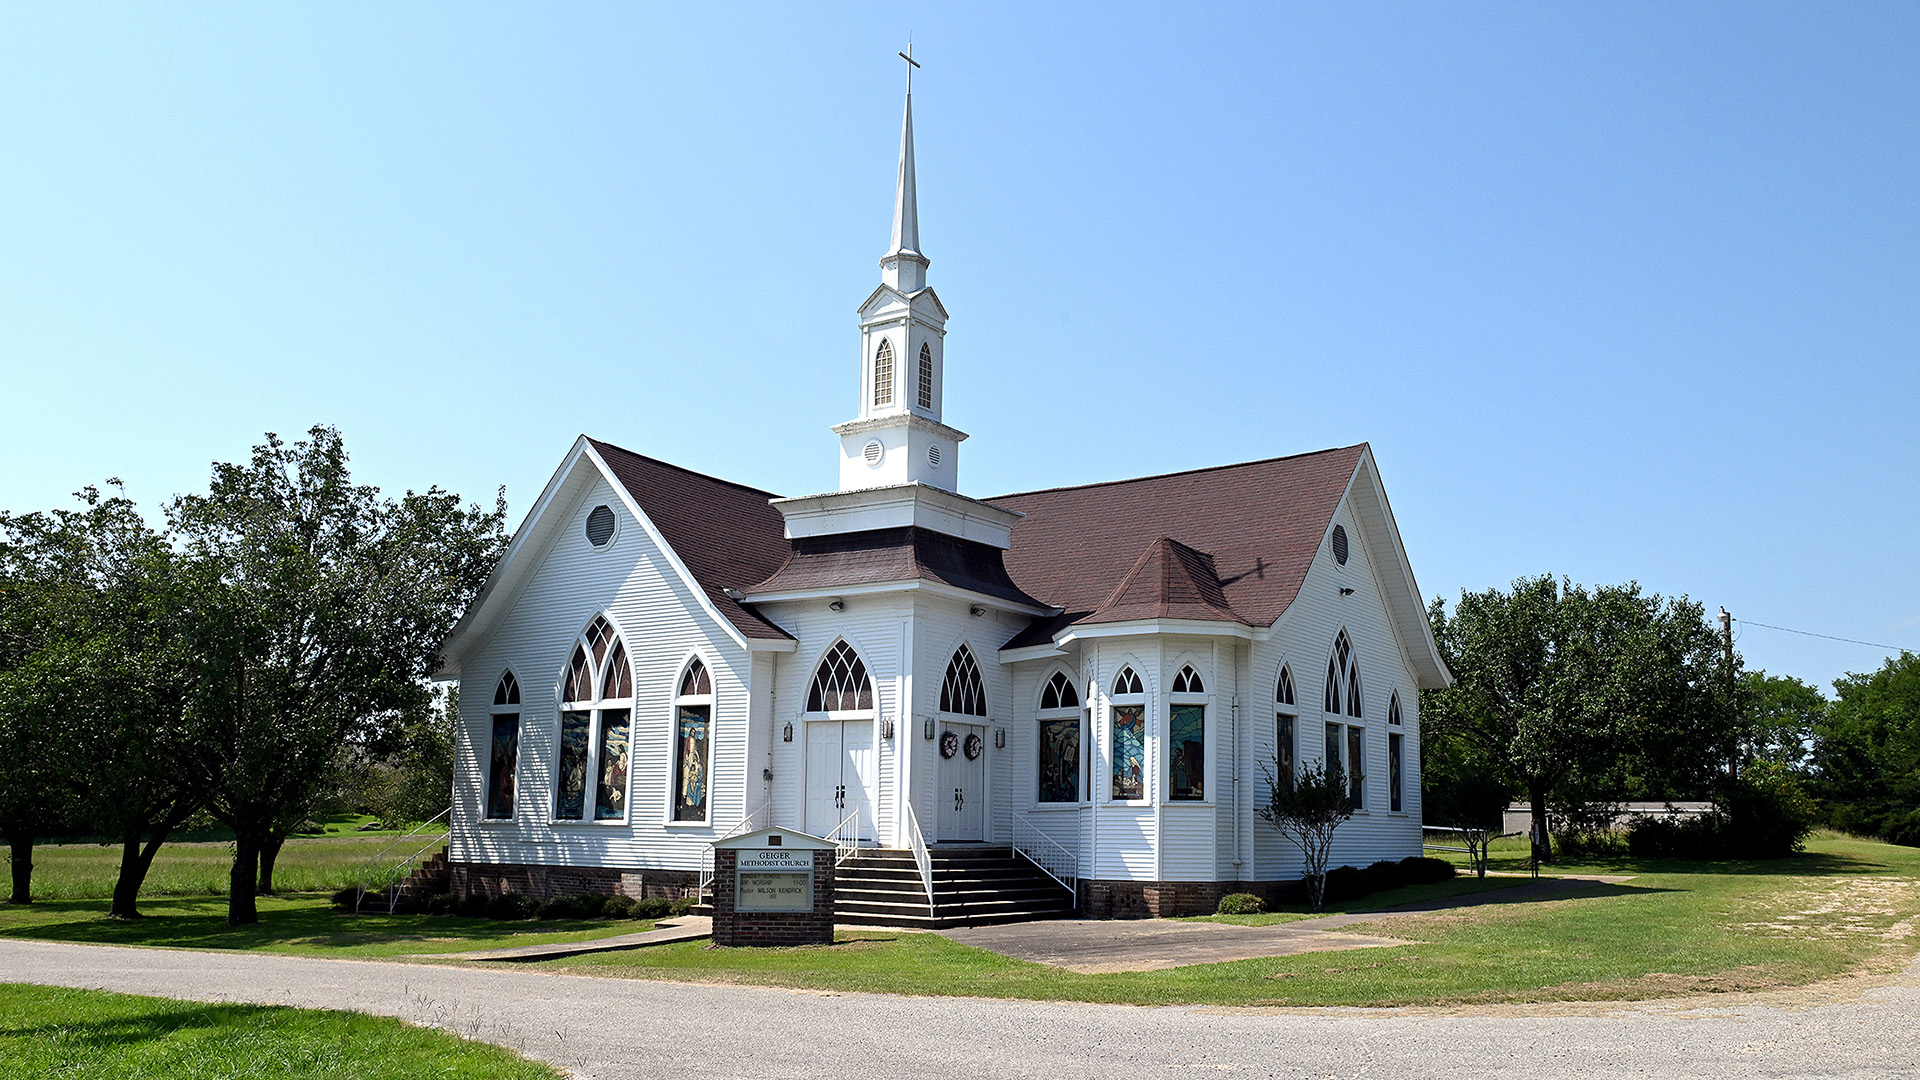 A wood-sided church with a steeple topped by a cross and flanked by two building wings with stained-glass windows stands next to a driveway and is surrounded by trees.